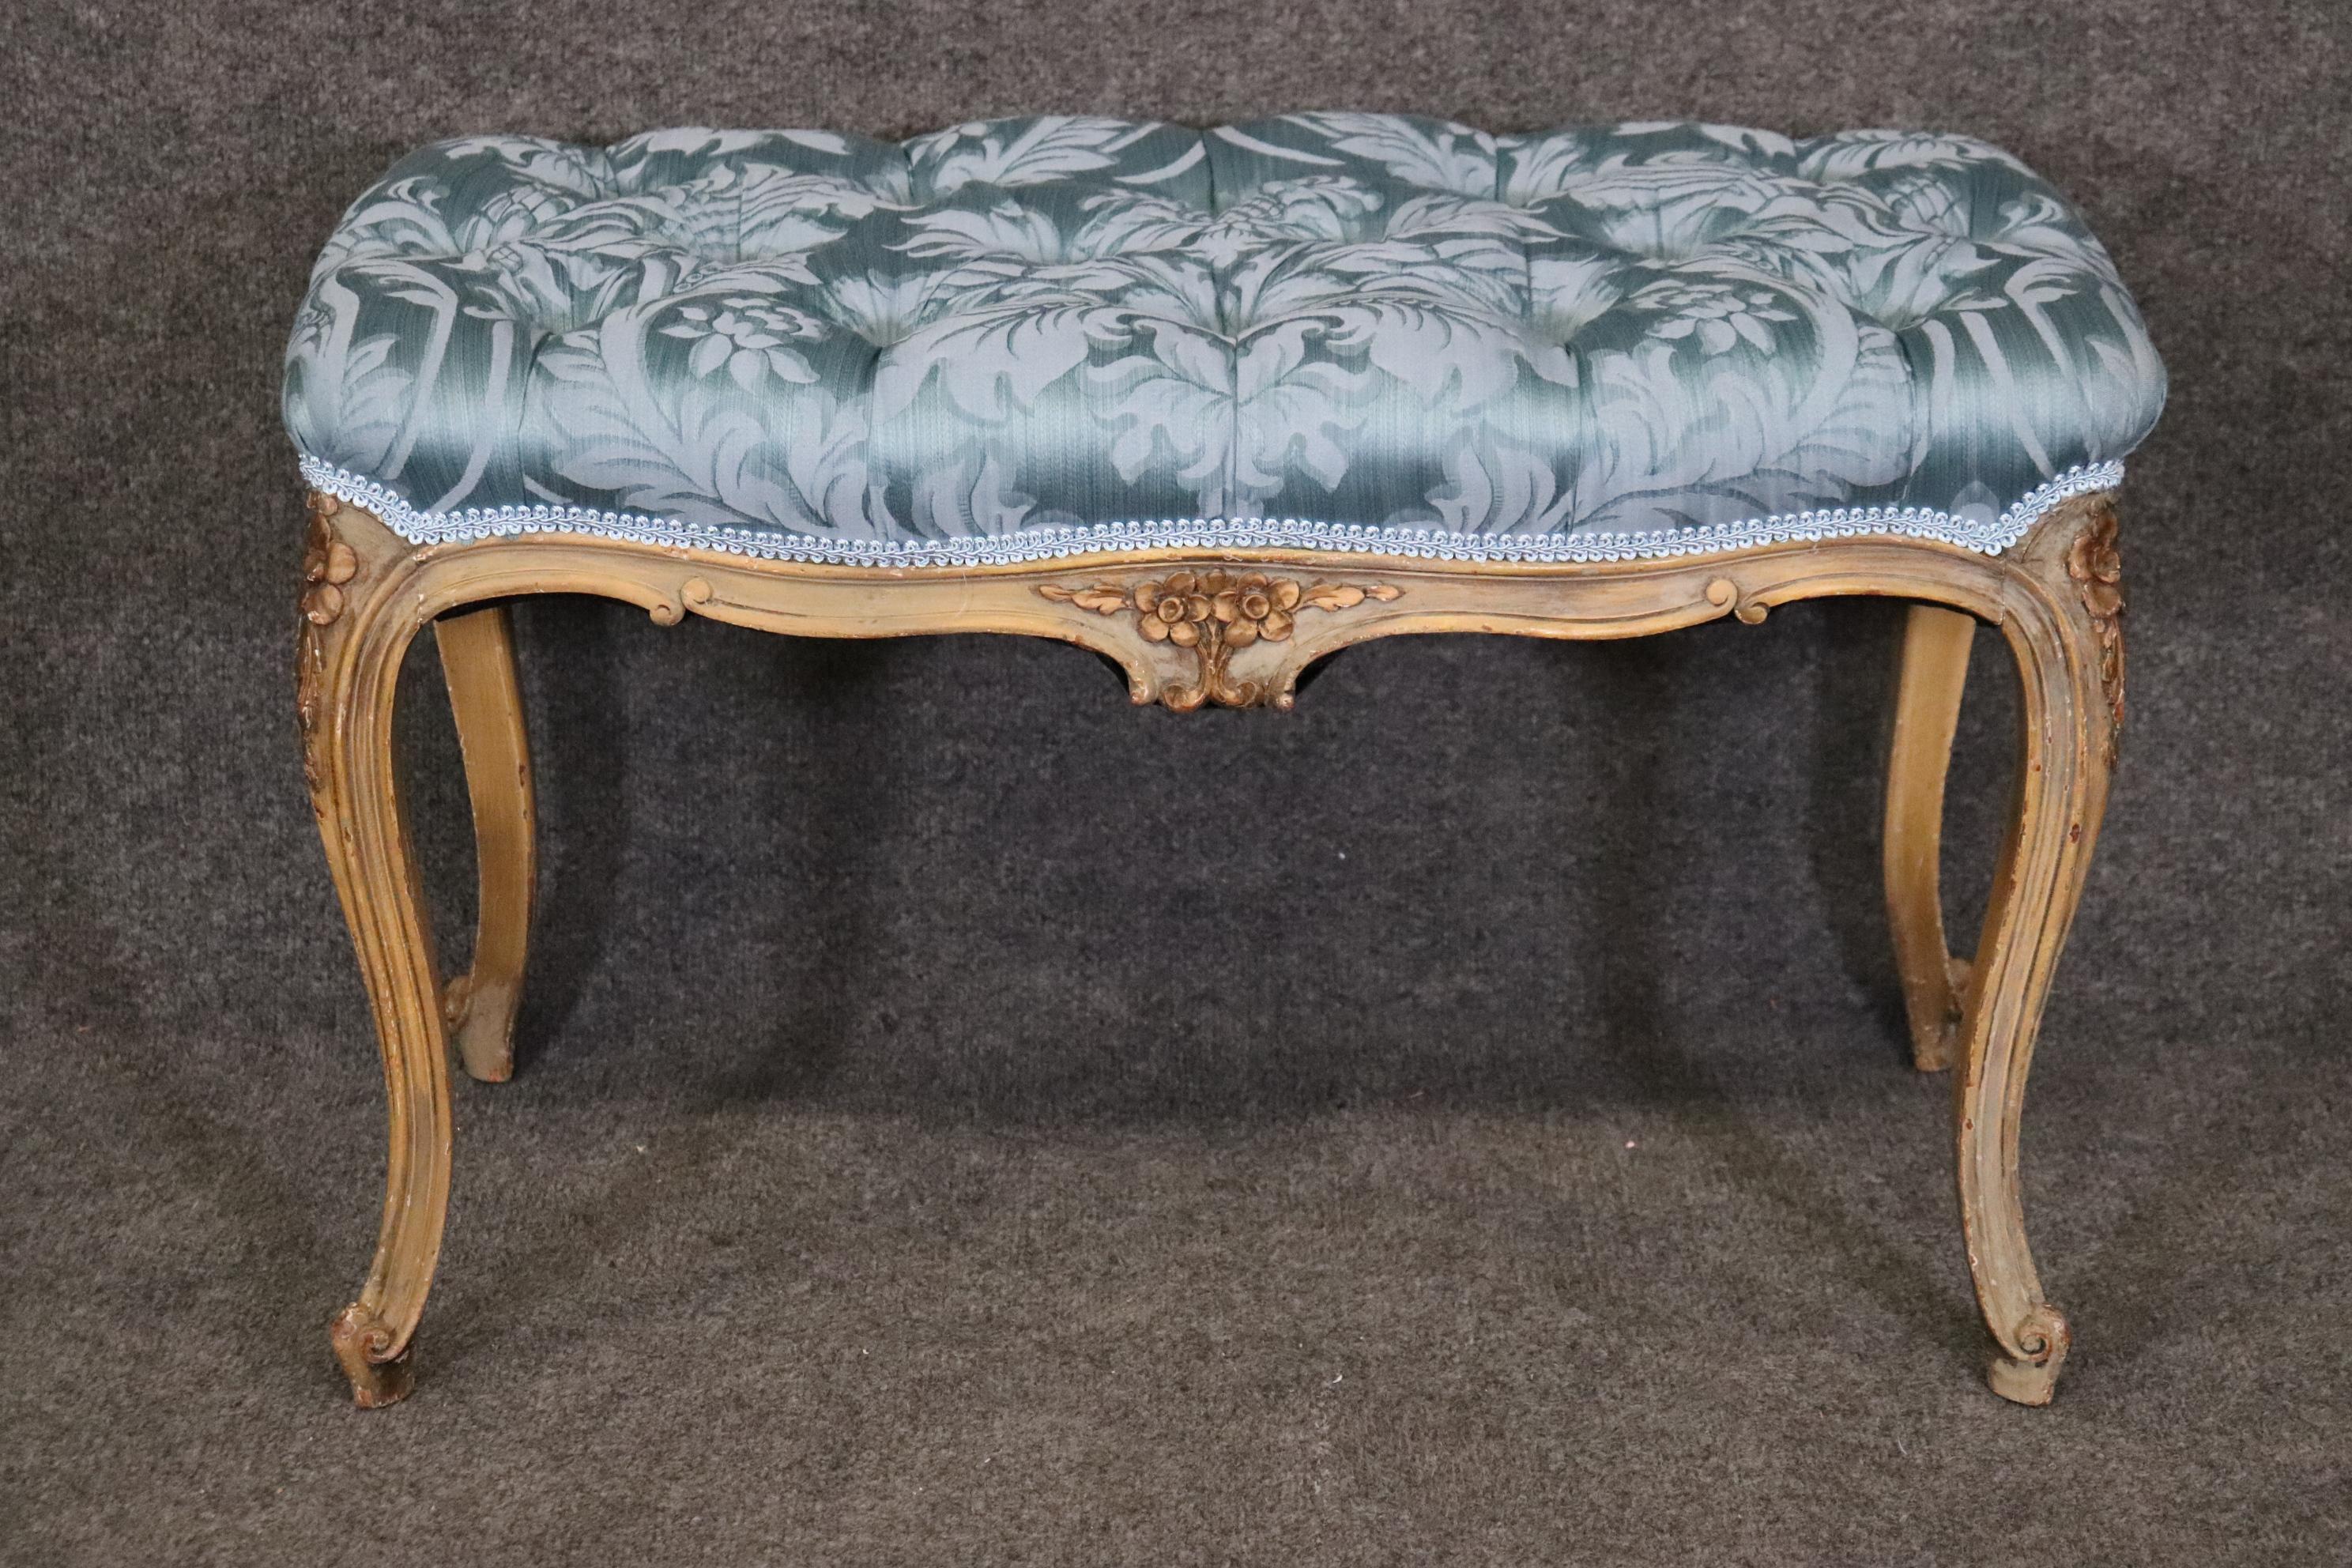 Dimensions- H: 18 1/4in W: 30in D: 16 3/4in 
This Antique French Louis XV Style Paint Decorated Tufted Bench, Footstool is a nice example of what luxurious furniture was like during the late 19th and early 20th century. This bench or footstool is